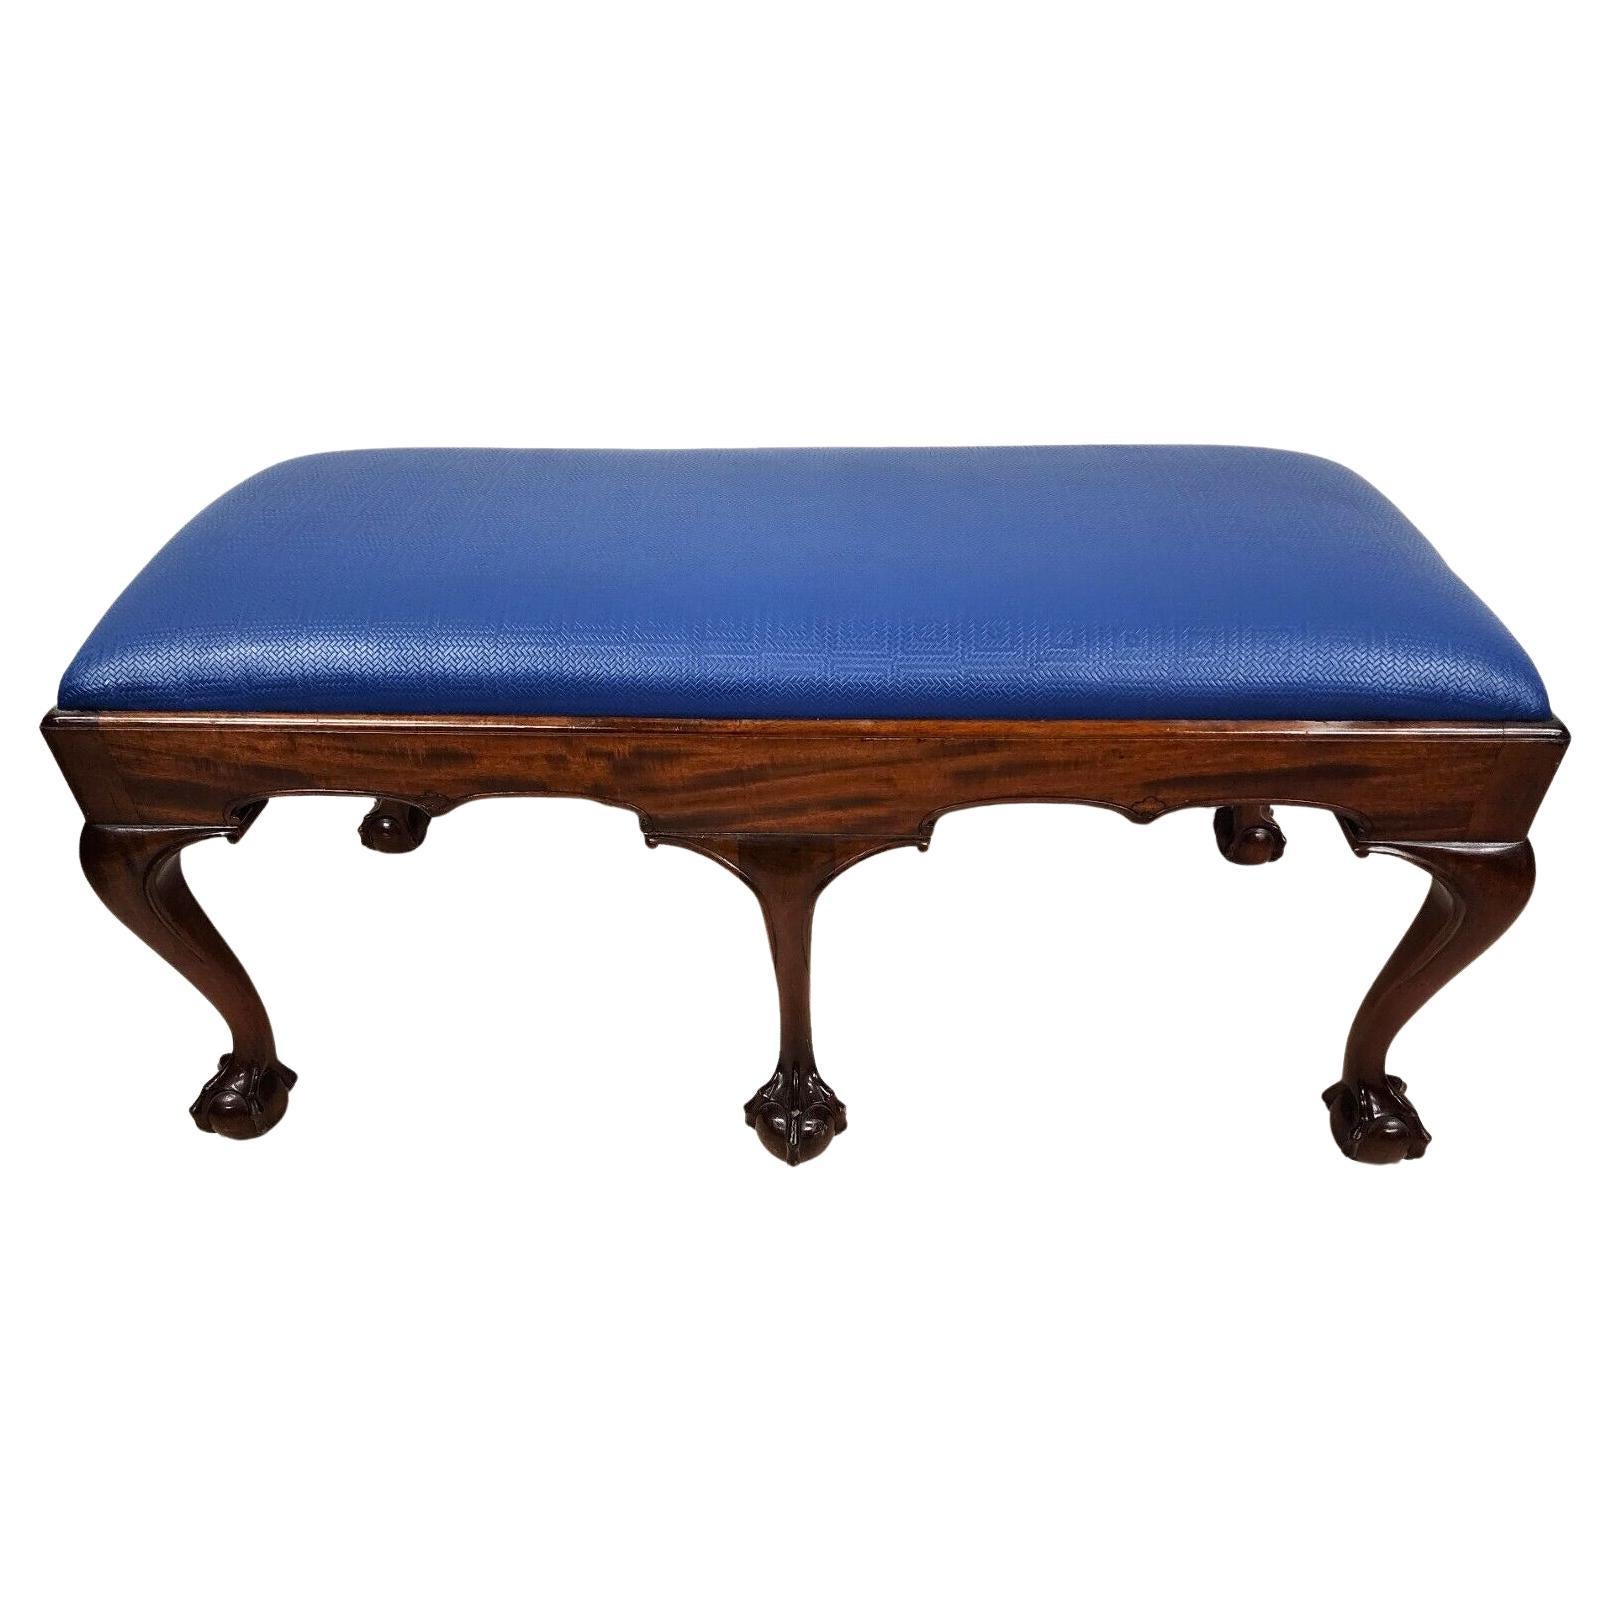 Queen Anne Bench Vintage Mahogany by Nathan Margolis